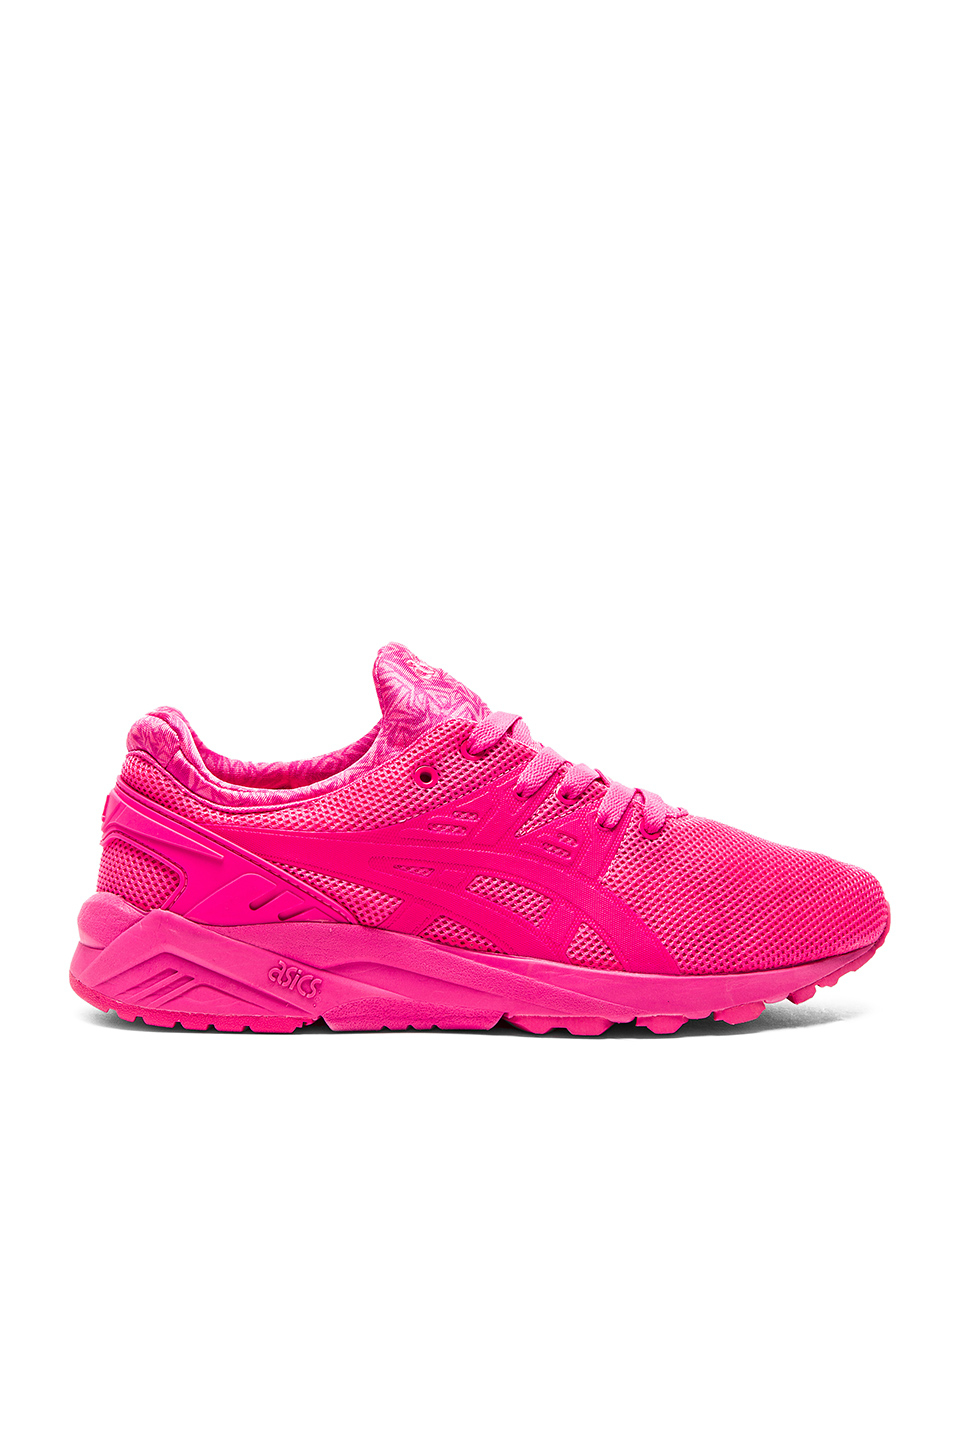 Asics Gel Kayano Trainer Evo in Pink for | Lyst